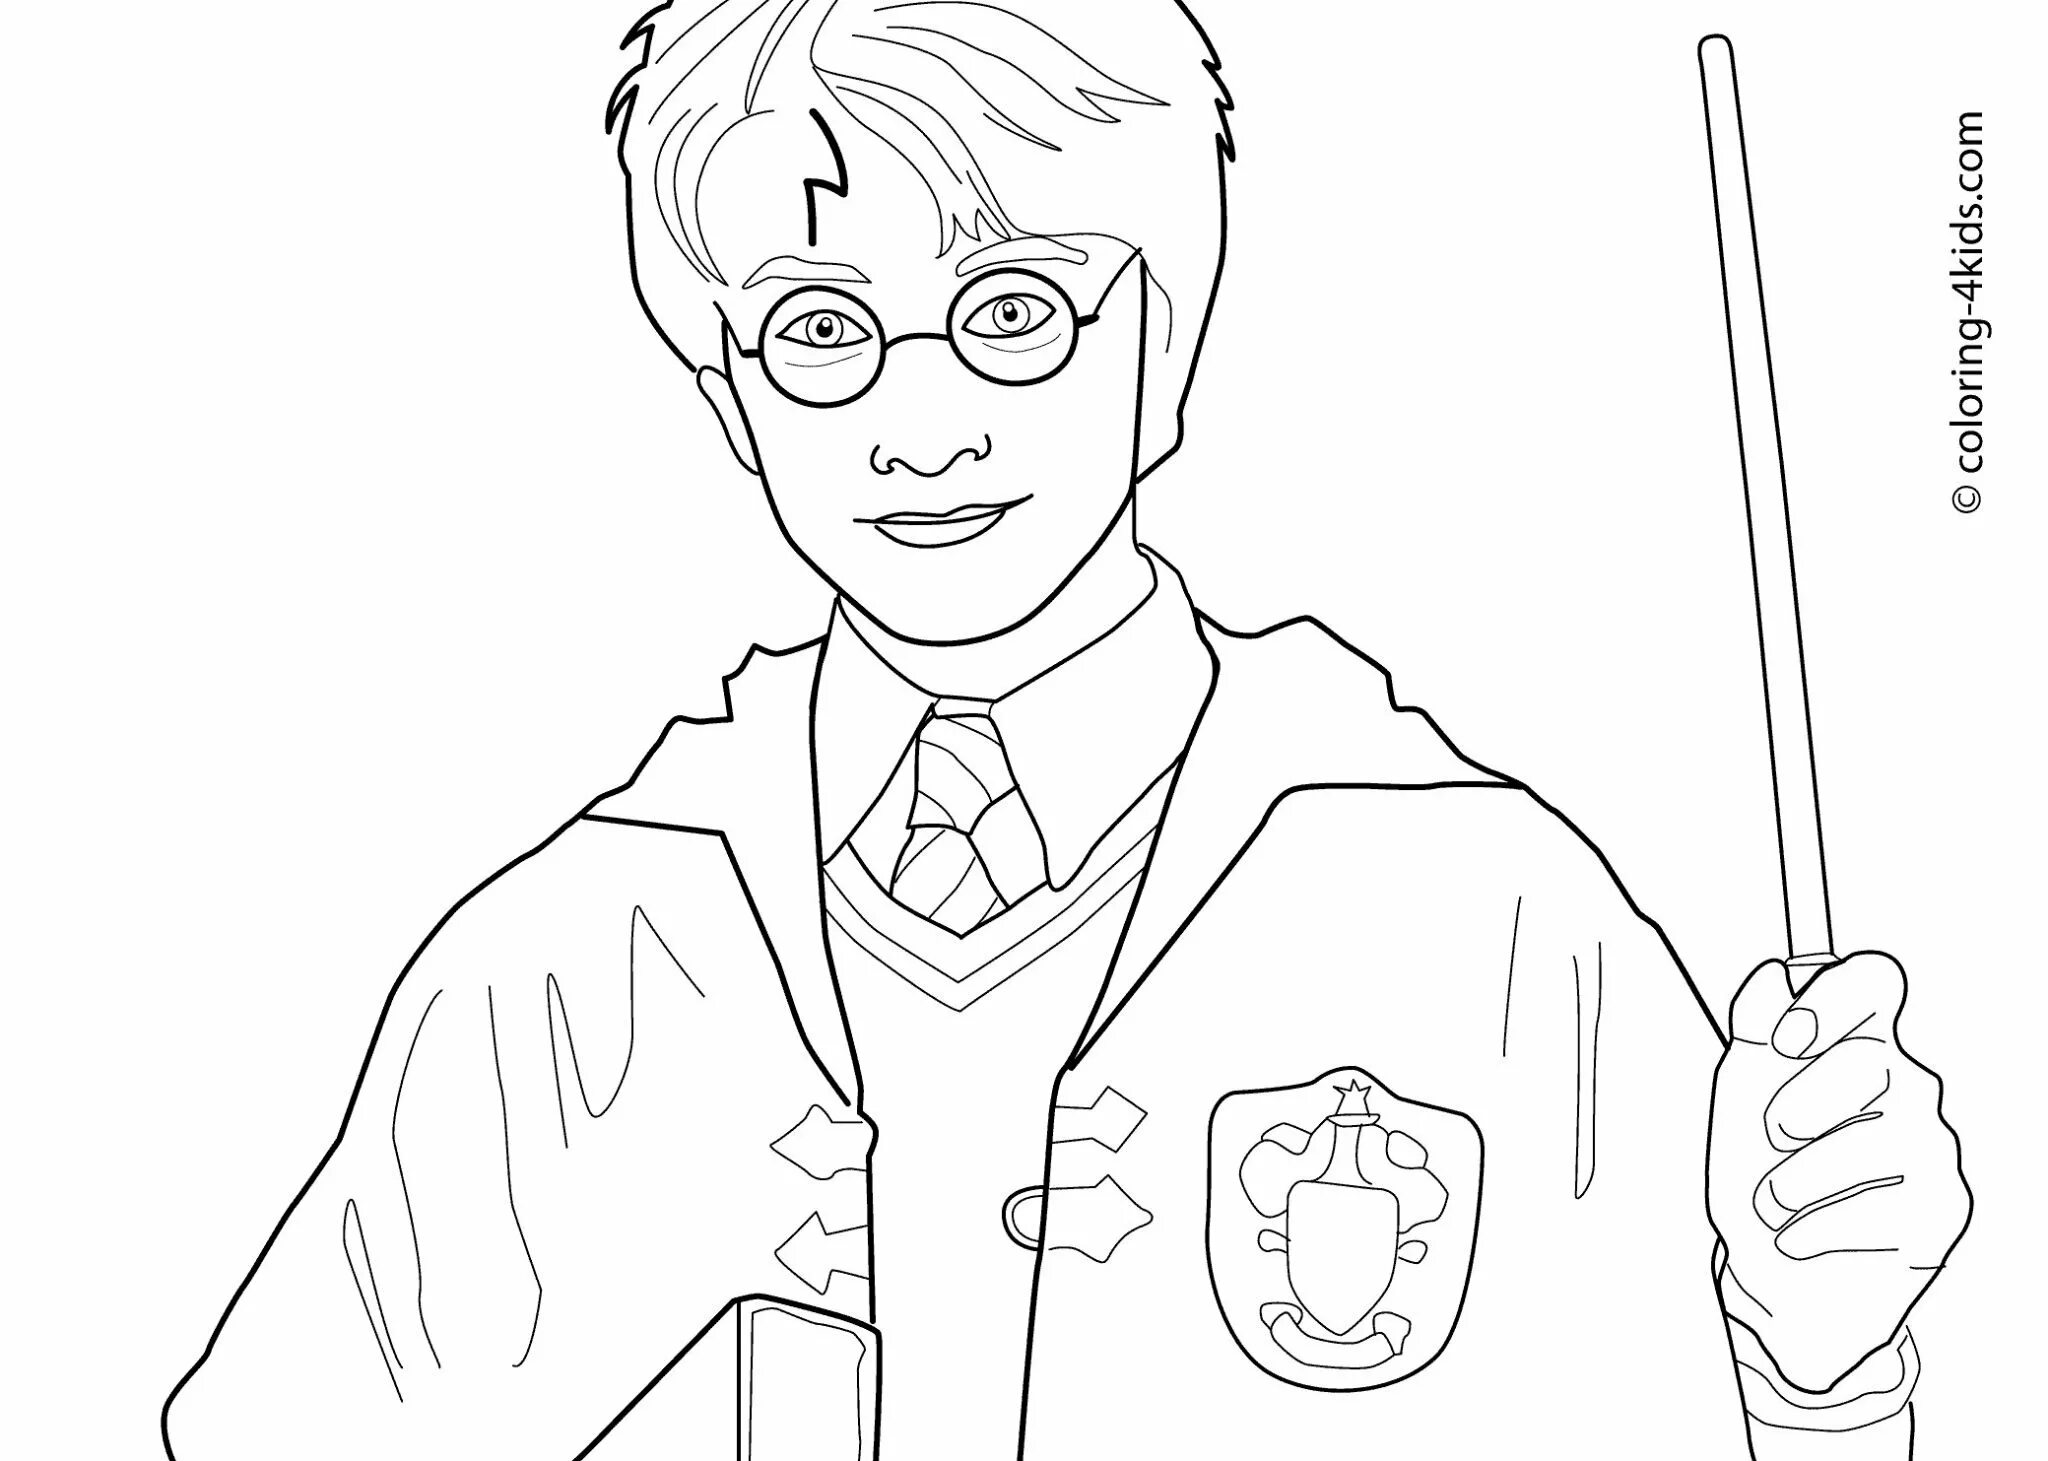 Harry potter drawing #11